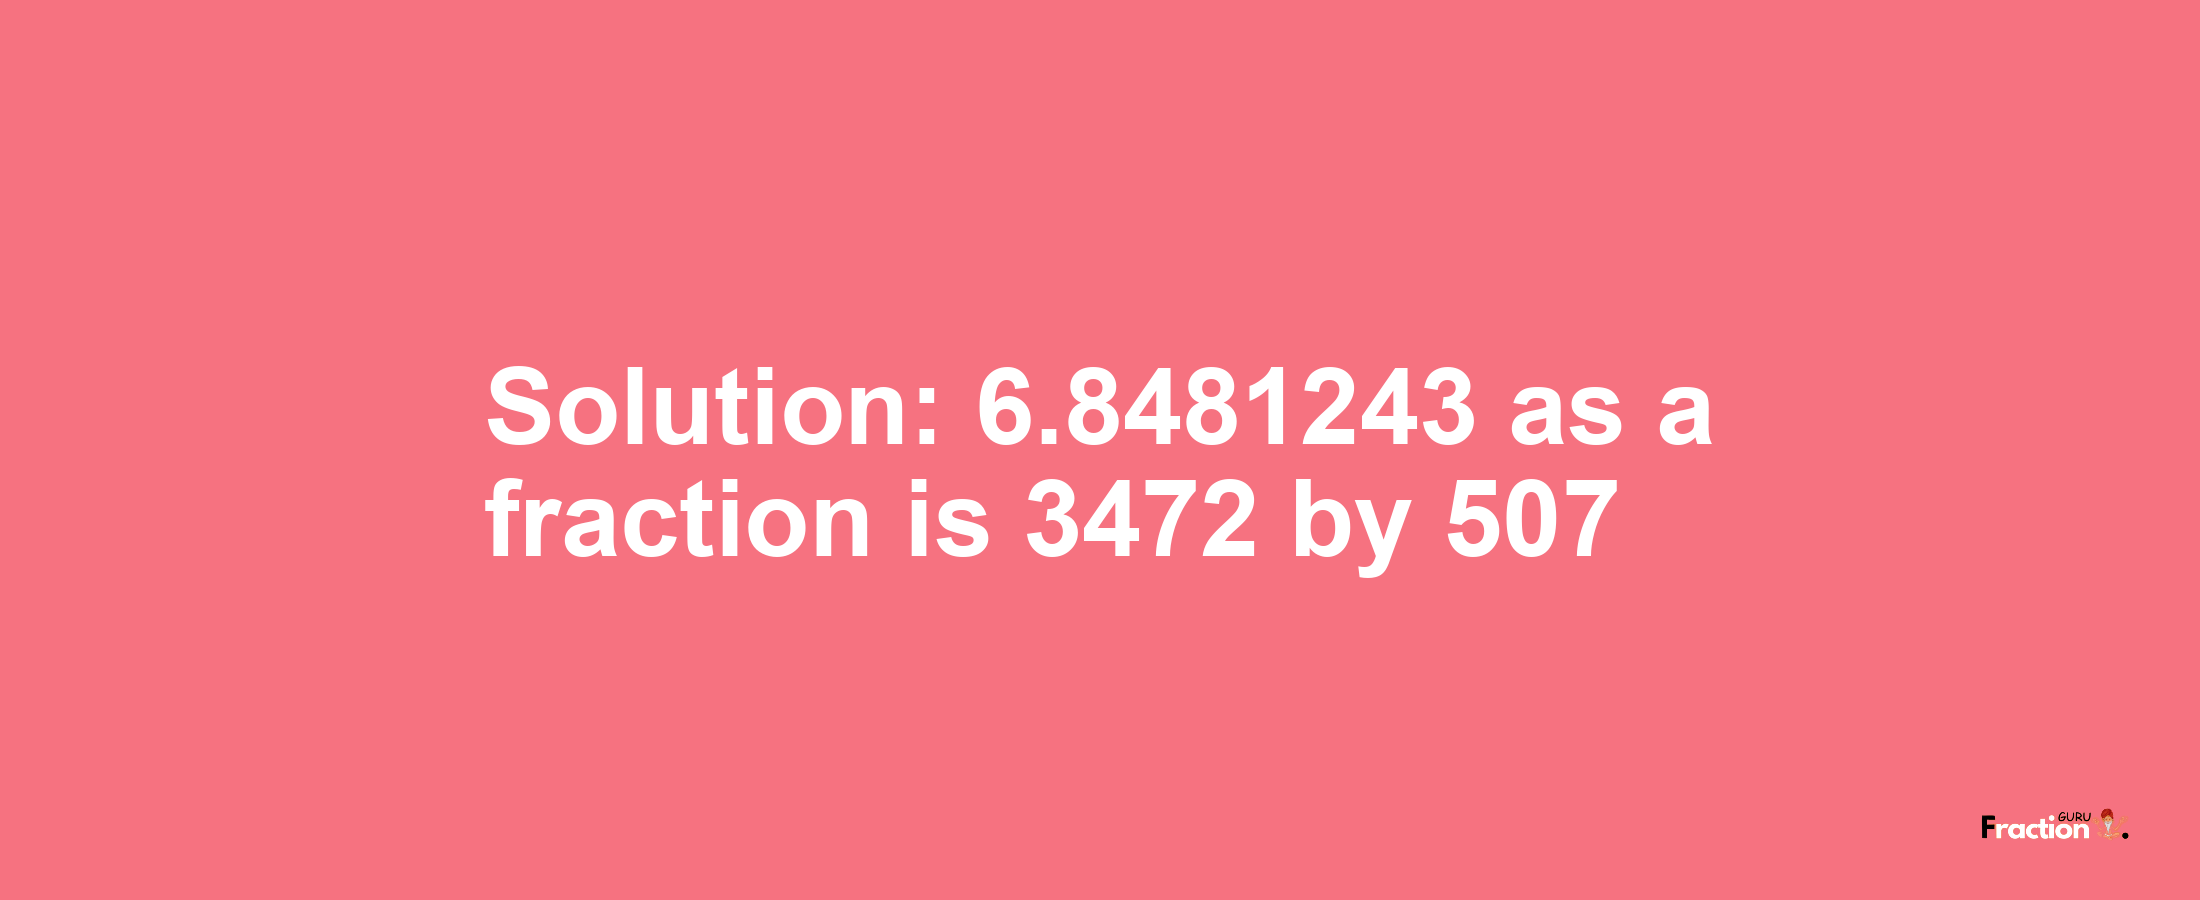 Solution:6.8481243 as a fraction is 3472/507